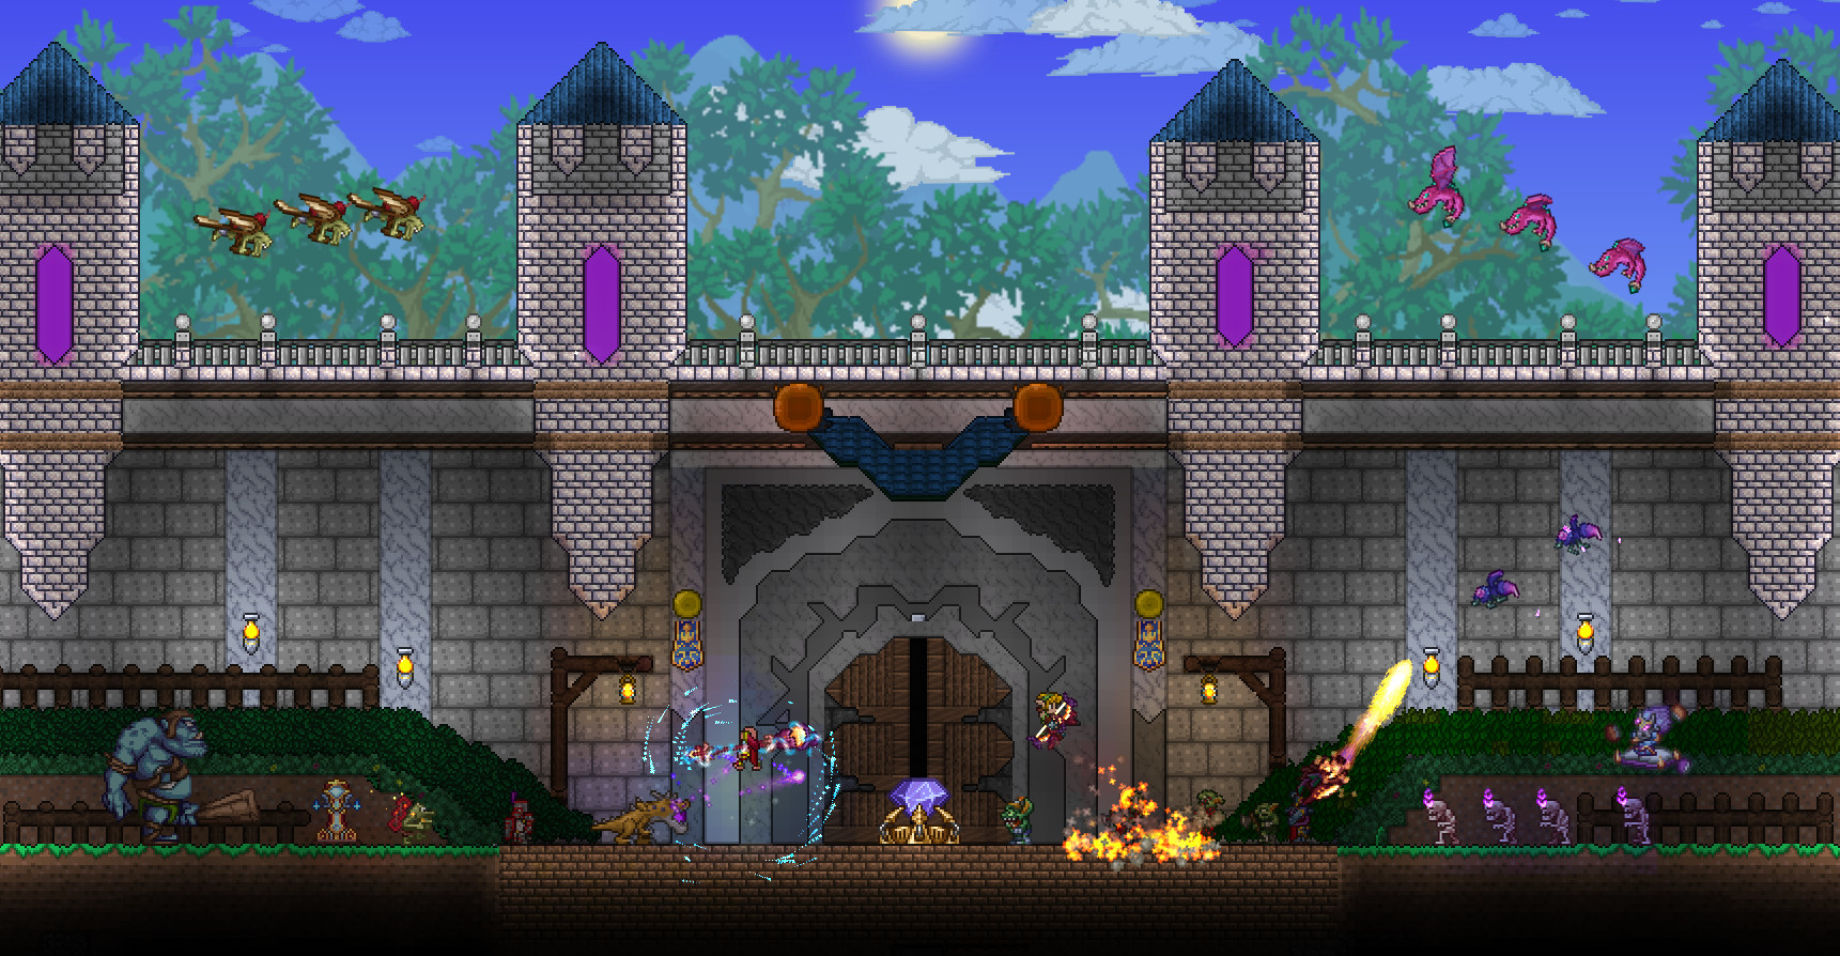 Does Terraria Support Cross-platform Play? All You Need to Know